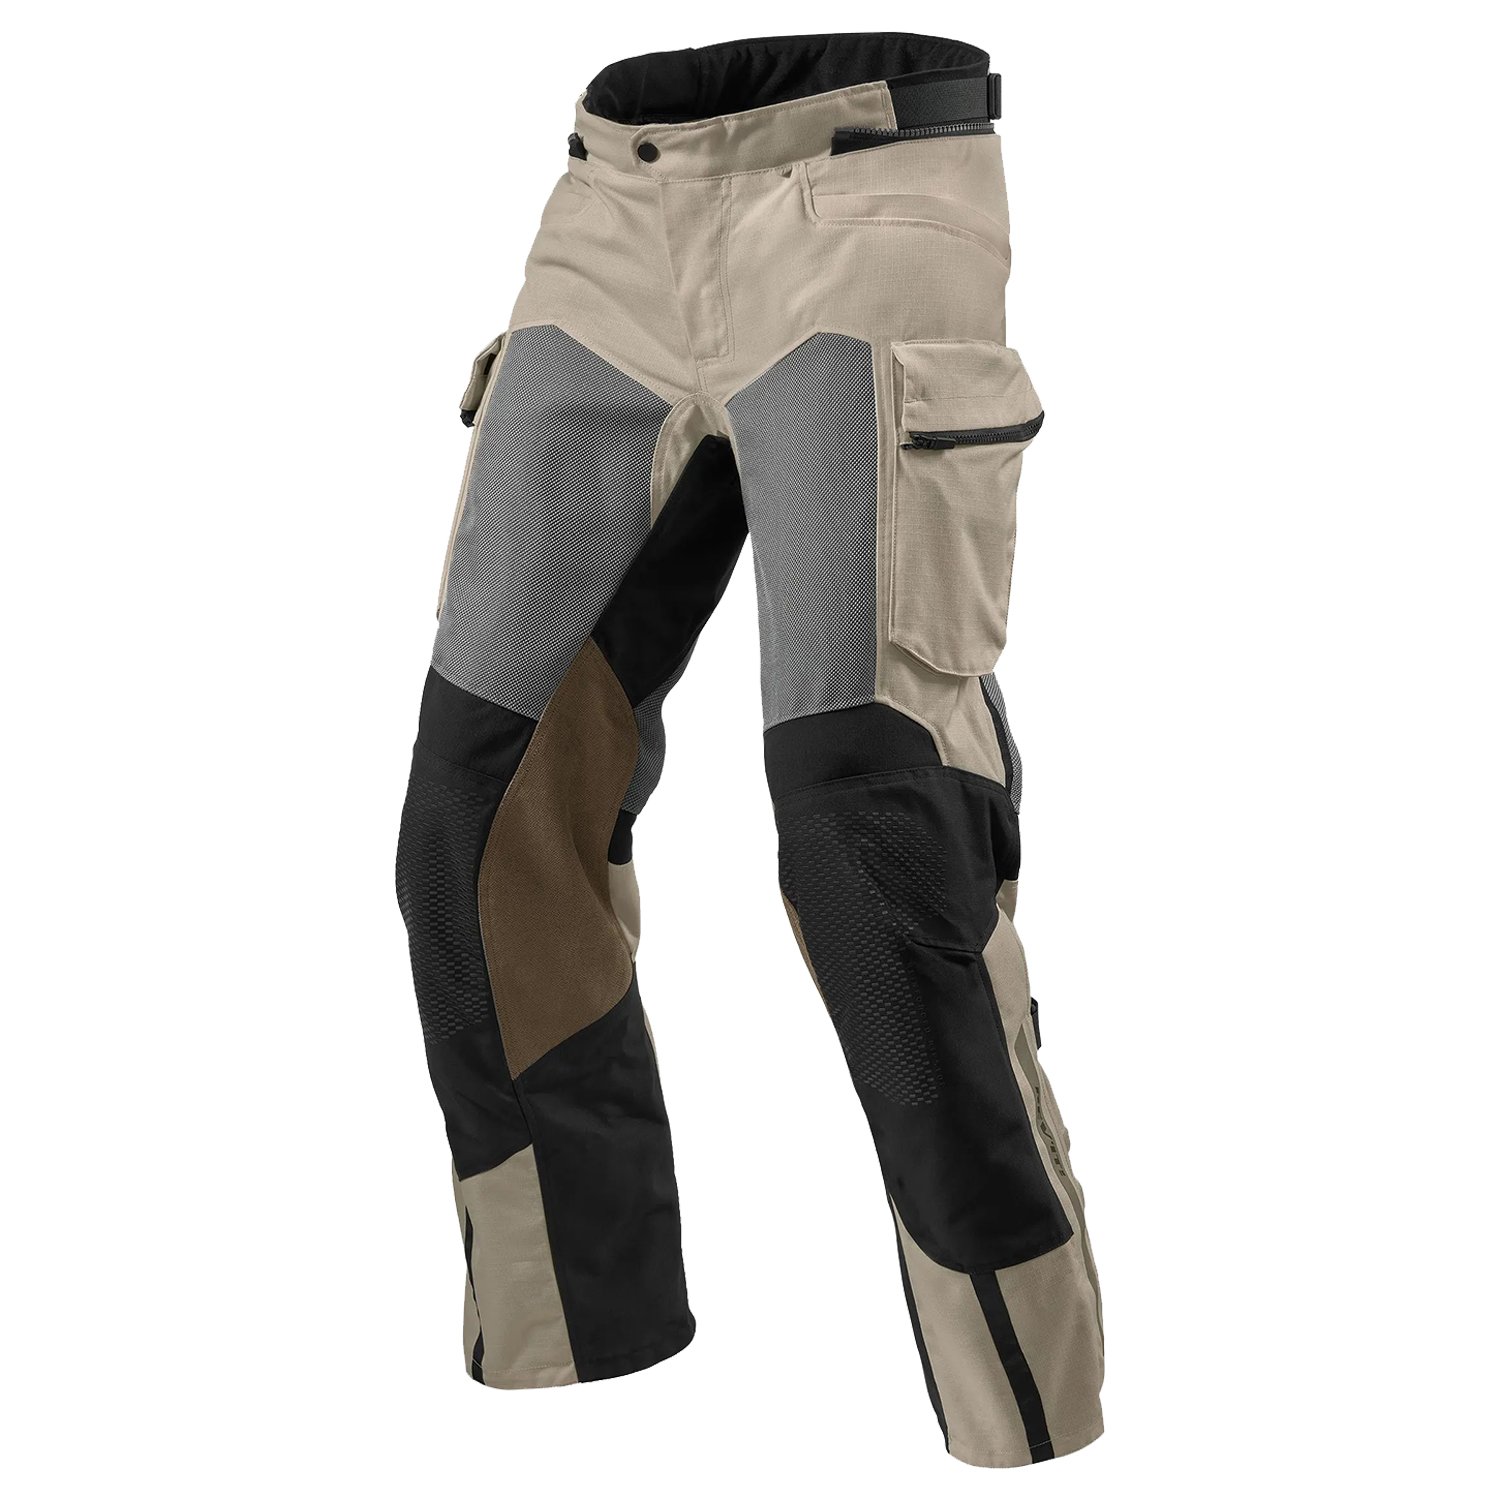 Image of REV'IT! Cayenne 2 Sand Motorcycle Pants Size S ID 8700001335621